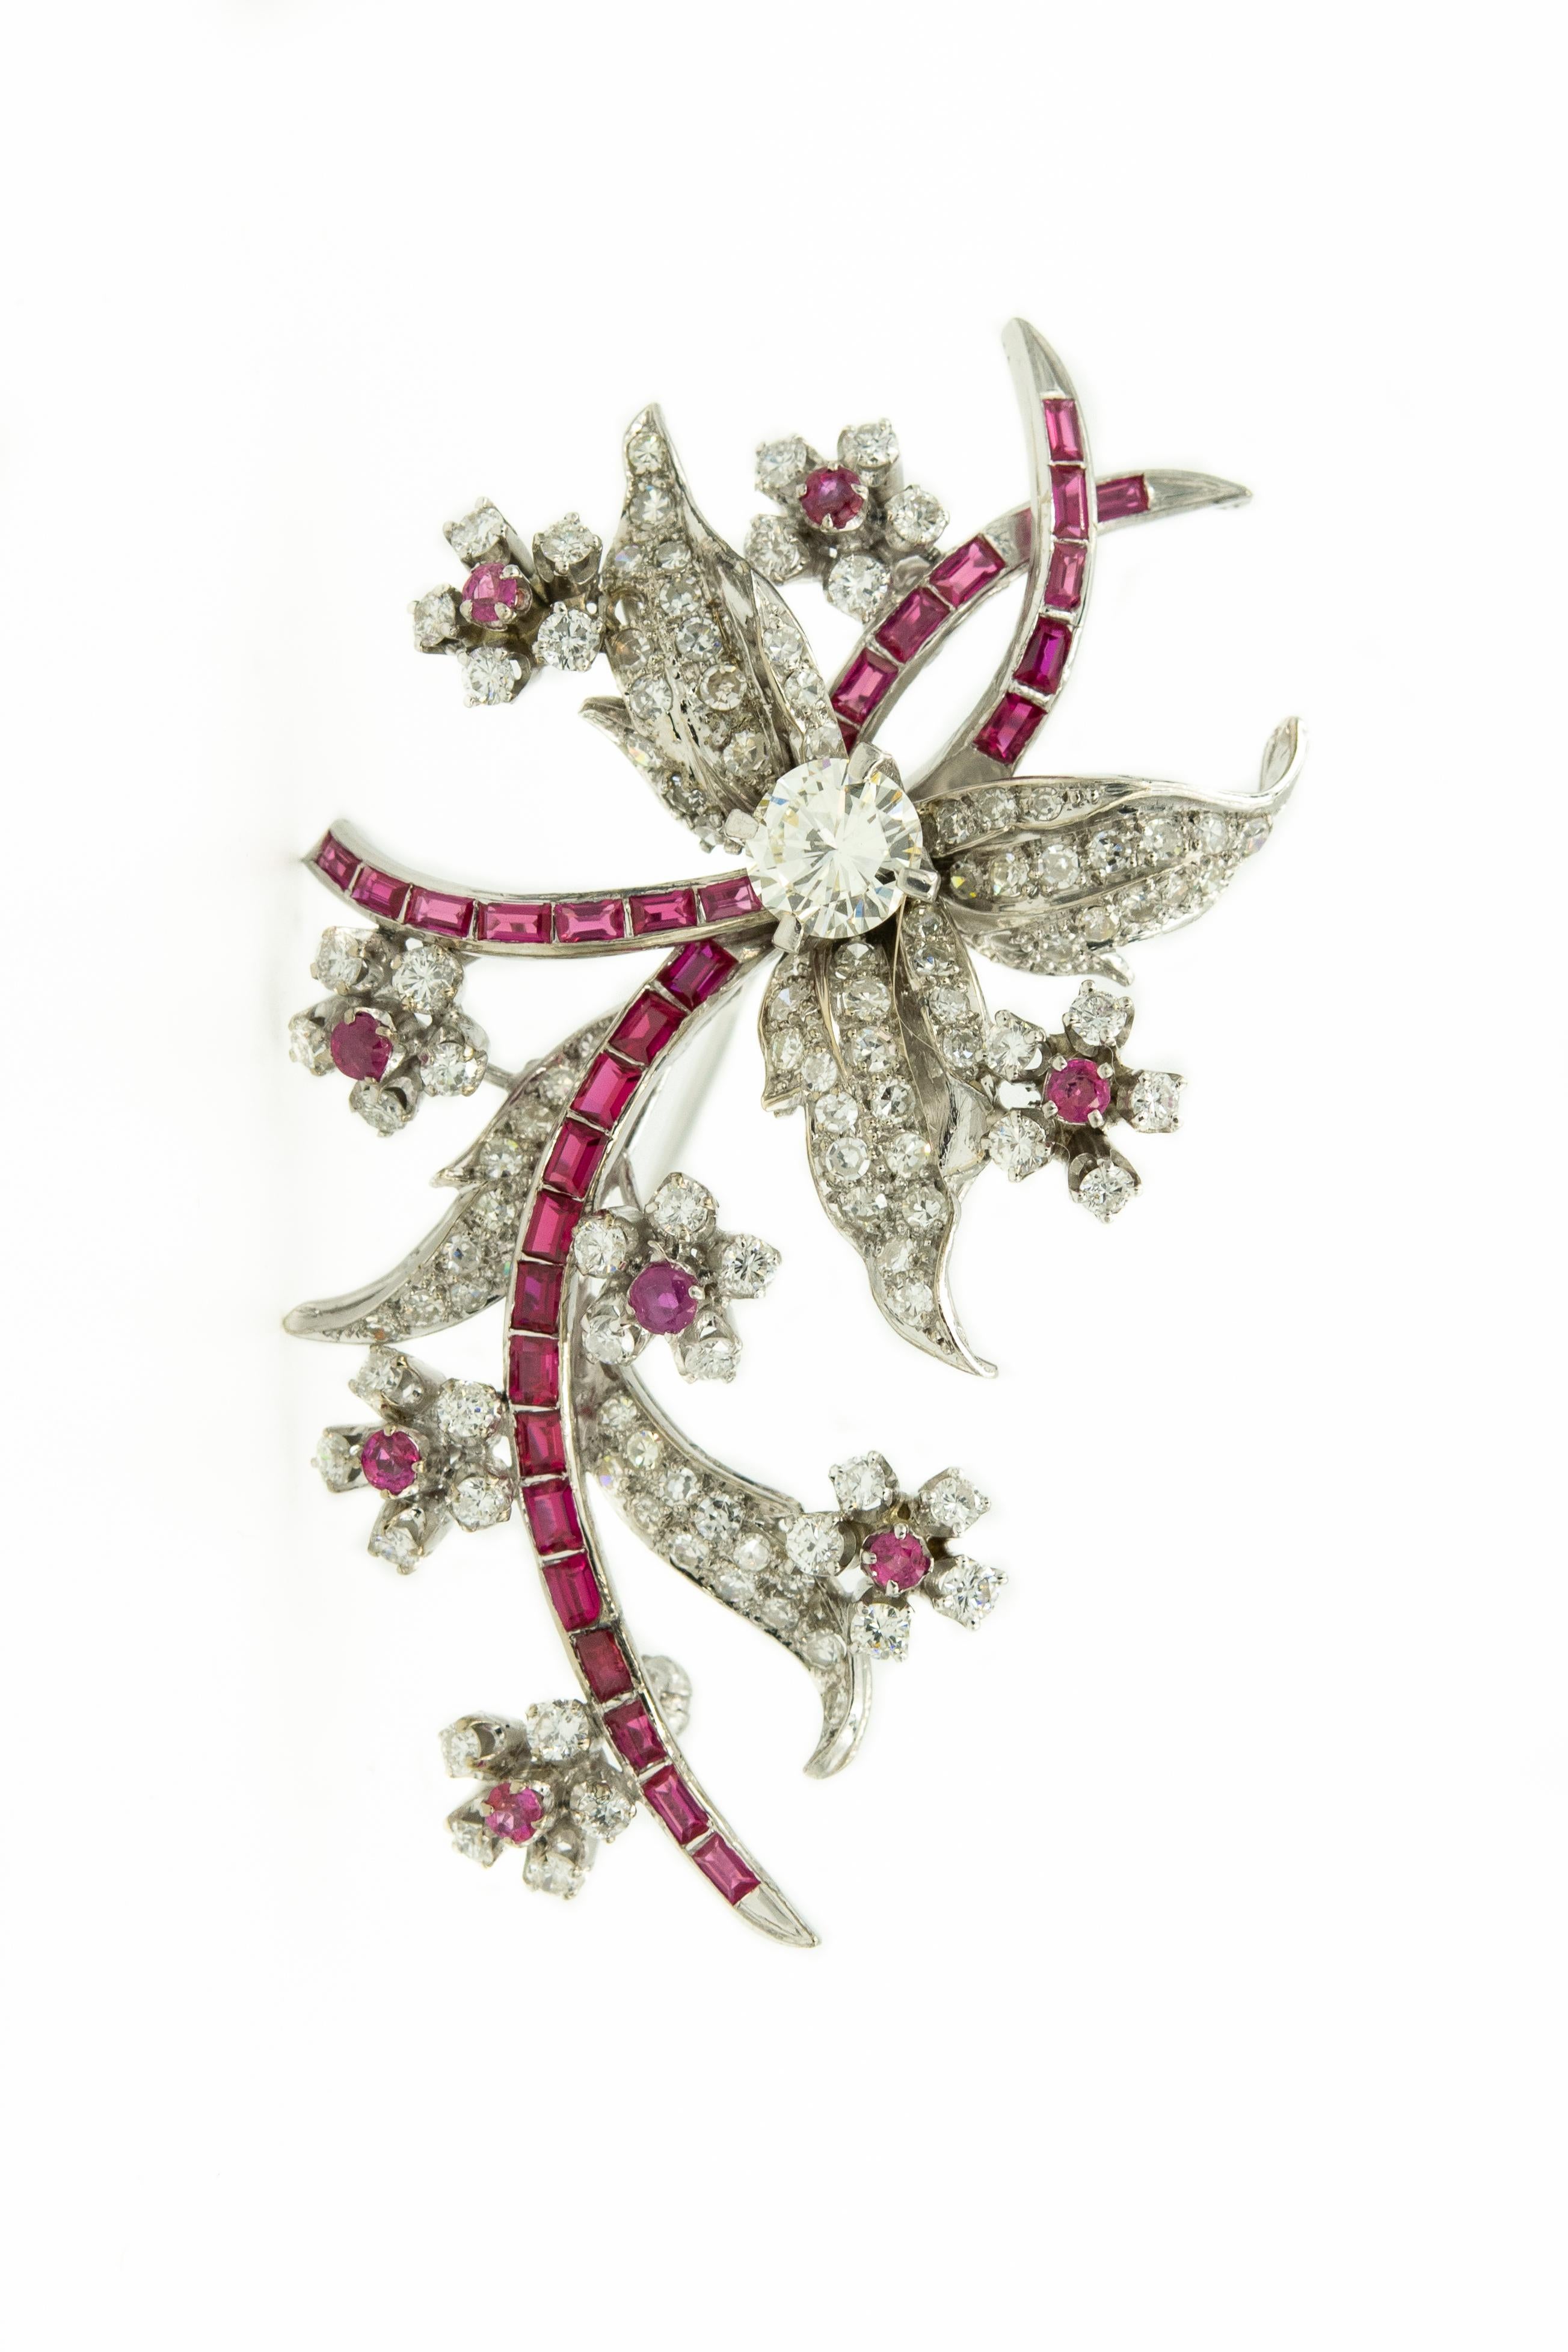 20th Century flower & leaf spray 18k white gold brooch with a channel set ruby stems and eight smaller diamond flowers with faceted ruby centers.  The larger flower has a diamond weighting approximately a 1.15 carats.  The are additional diamonds in